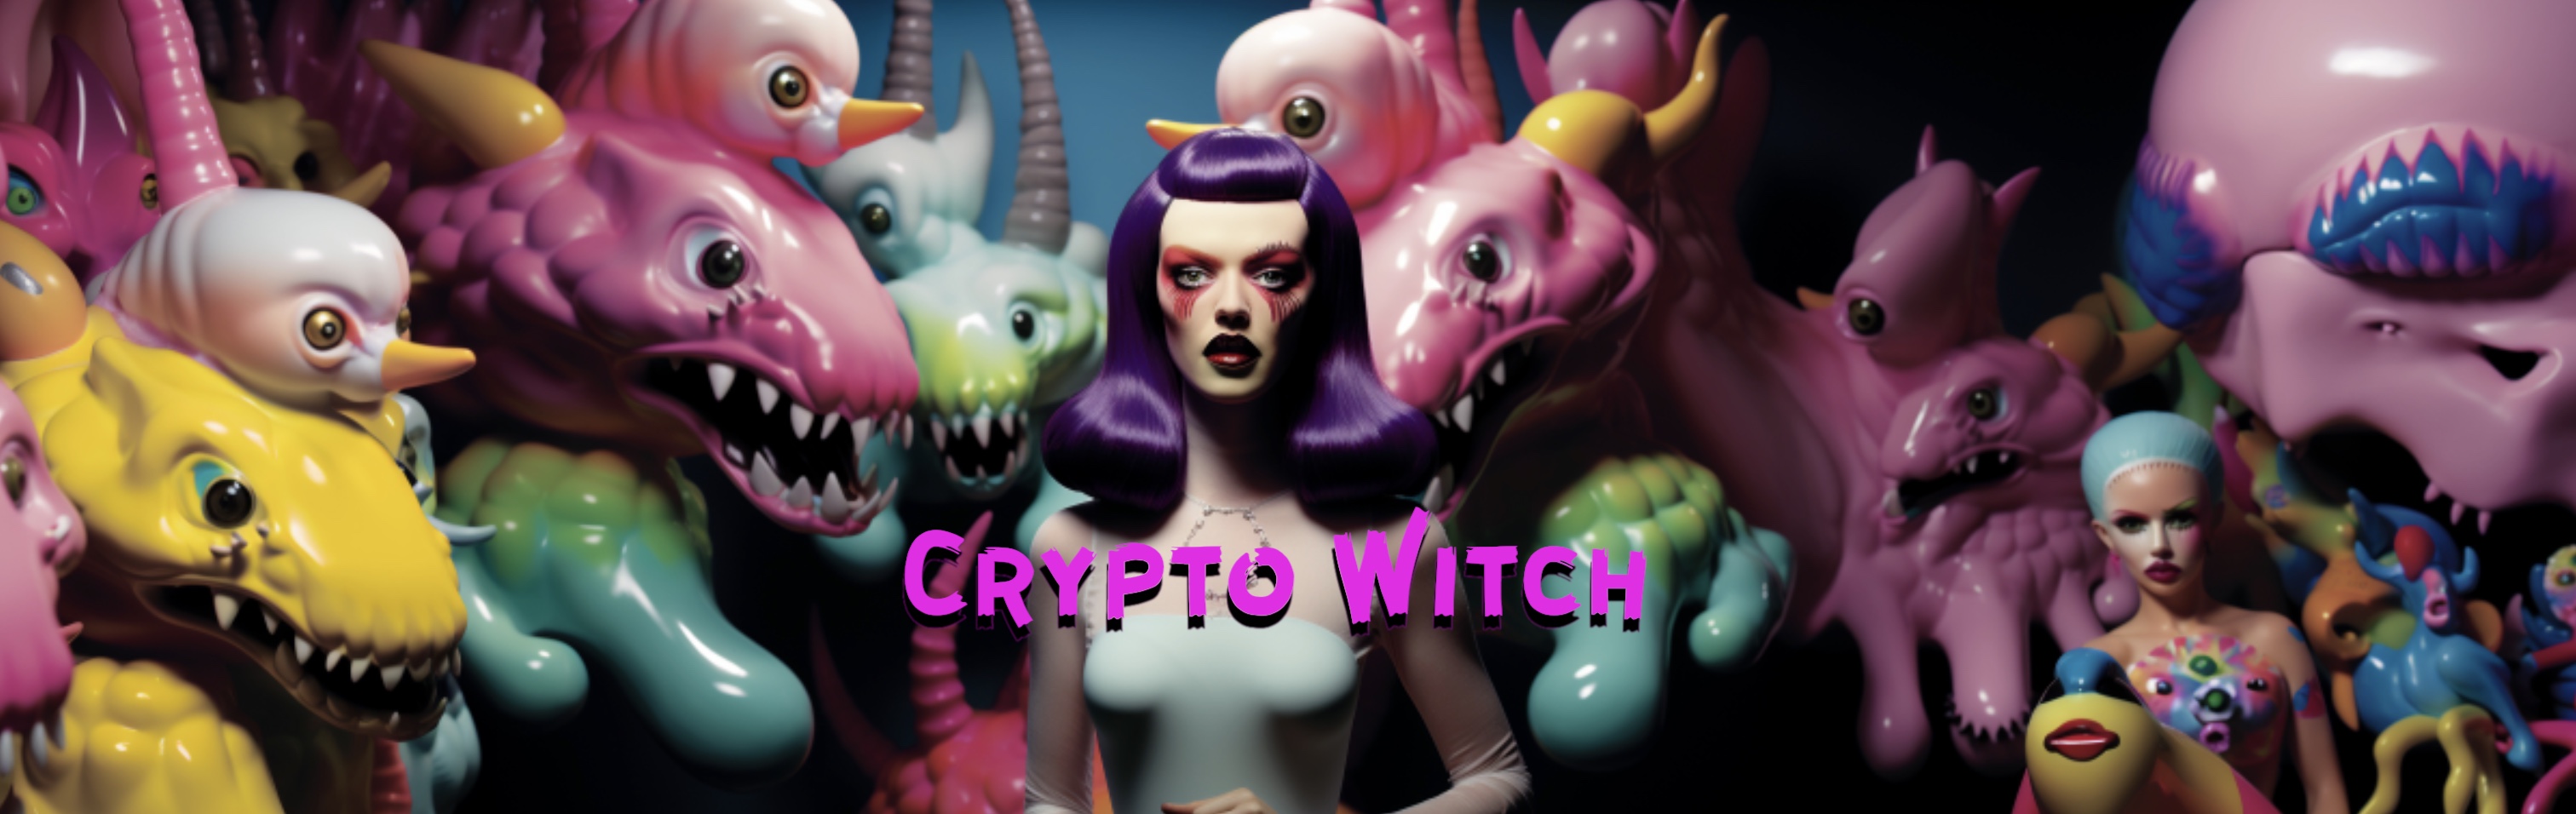 CryptoWitchNFT banner